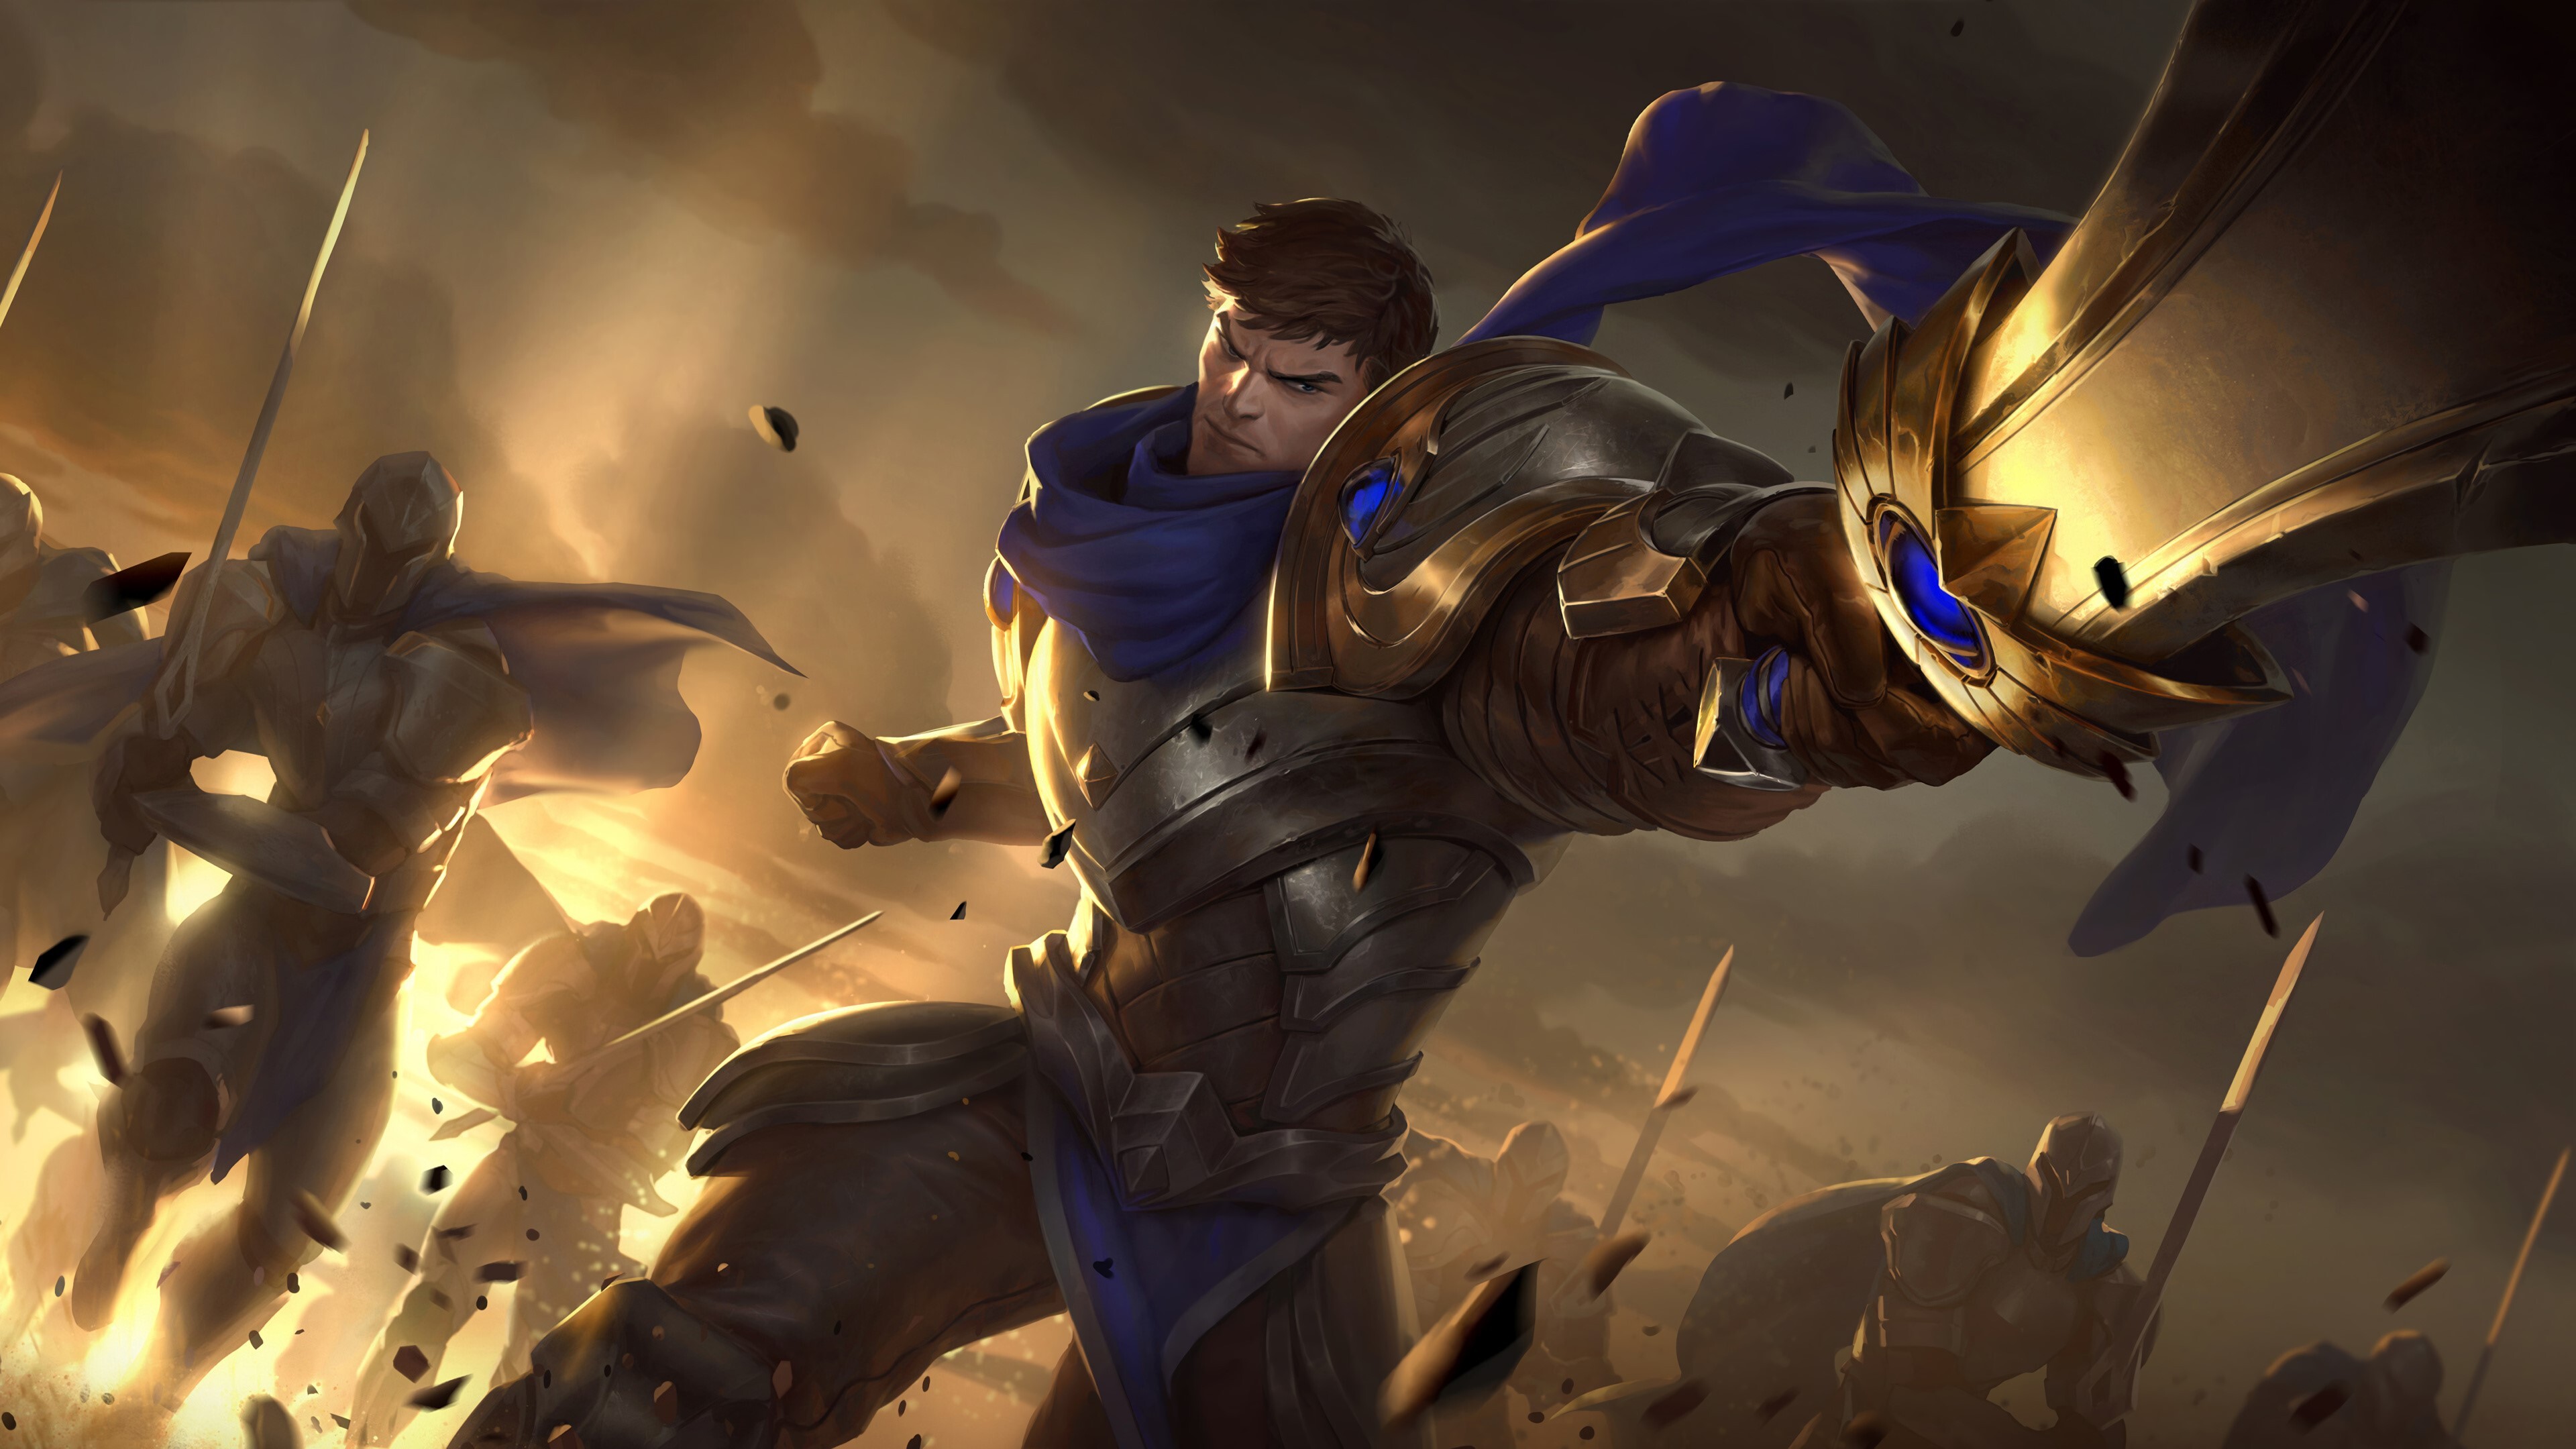 Garen: League of Legends champion, Playable character armed with the Silver Broadsword "Judgment". 3840x2160 4K Background.